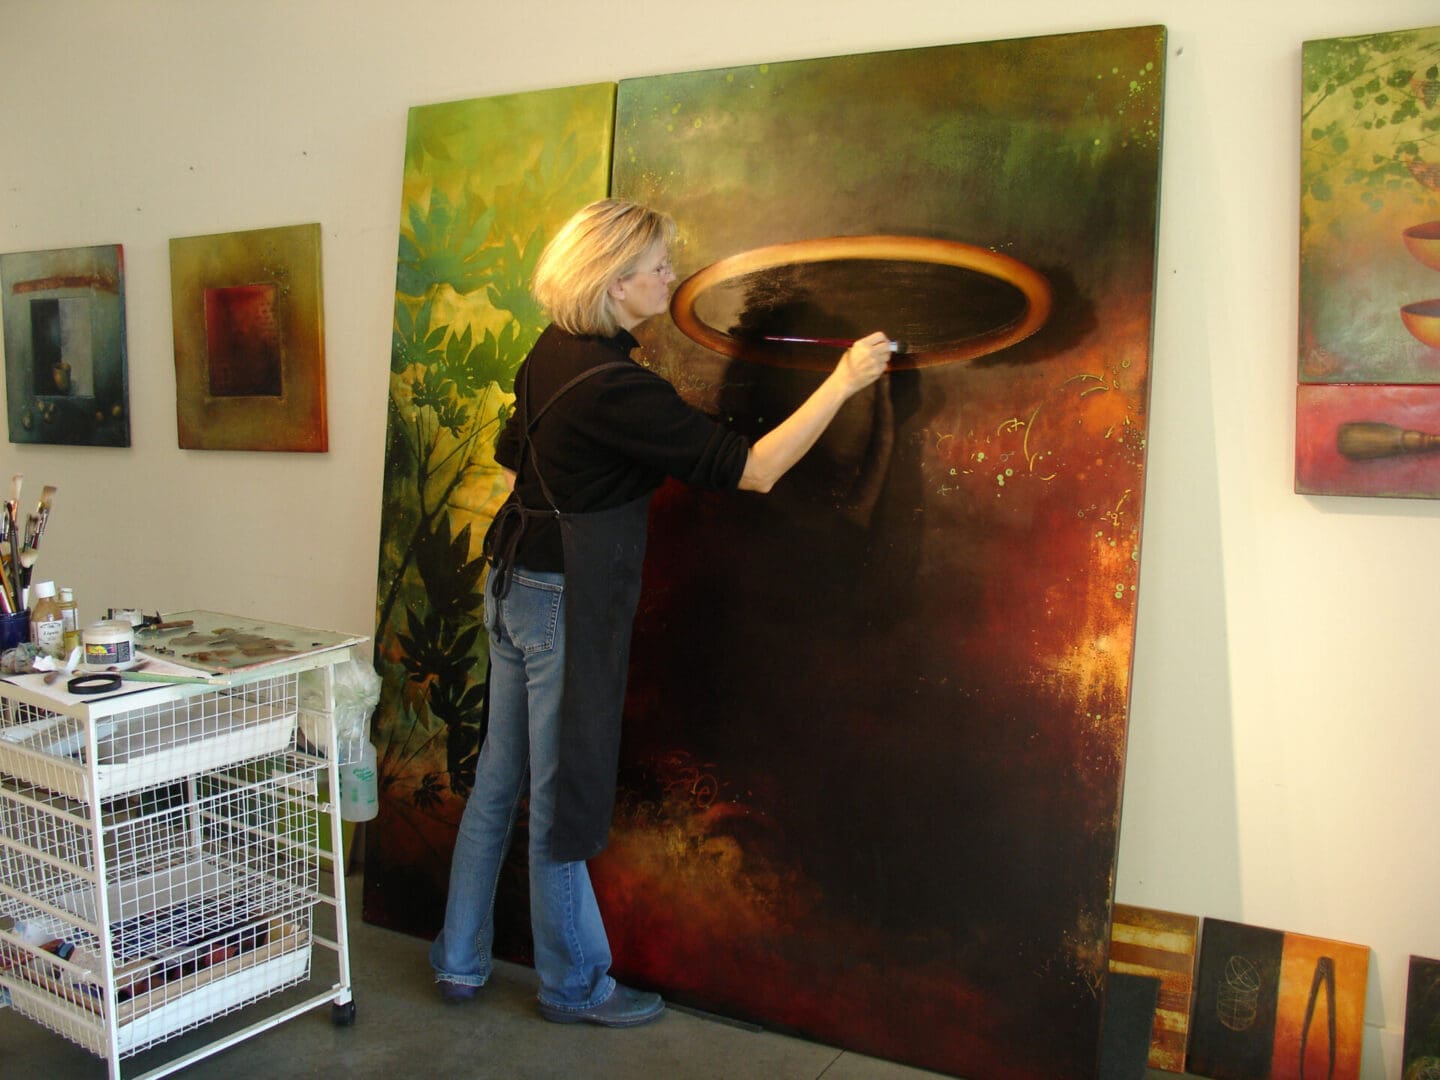 A woman is painting an image on the wall.